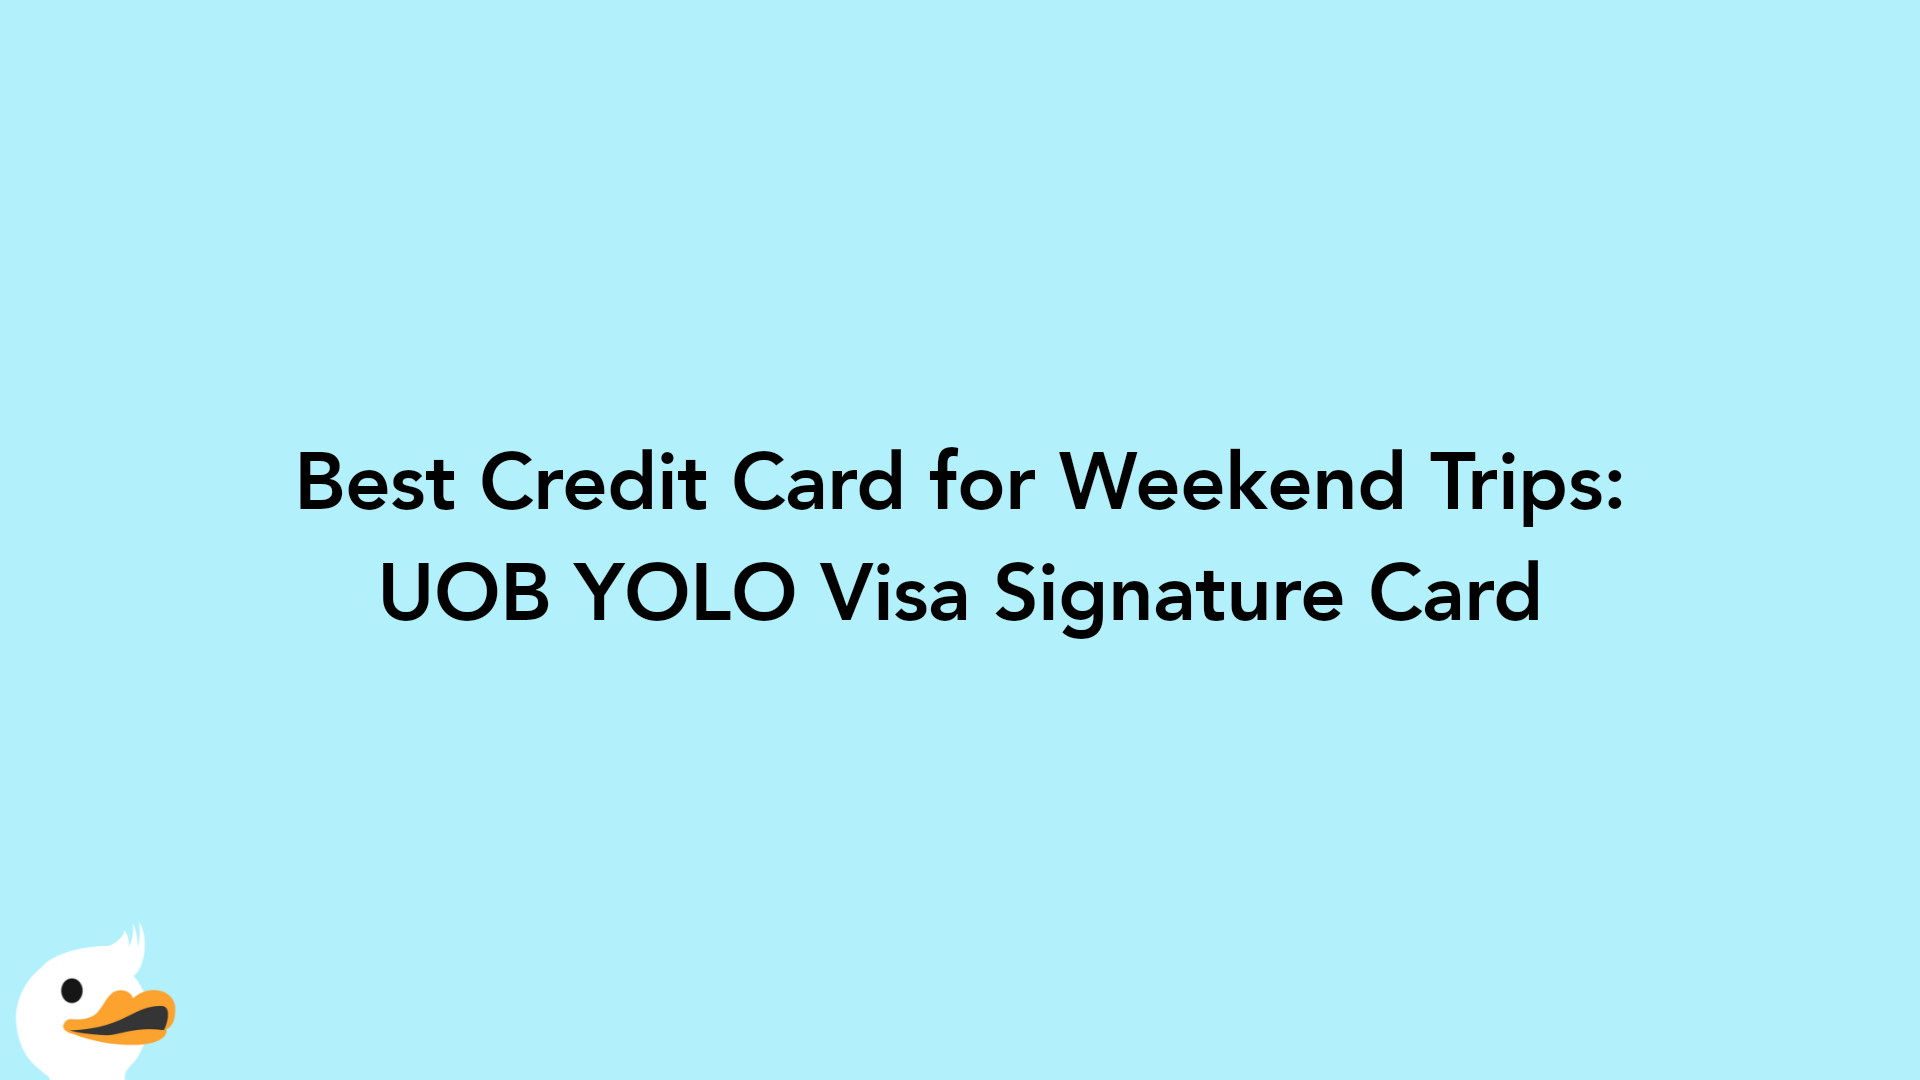 Best Credit Card for Weekend Trips: UOB YOLO Visa Signature Card